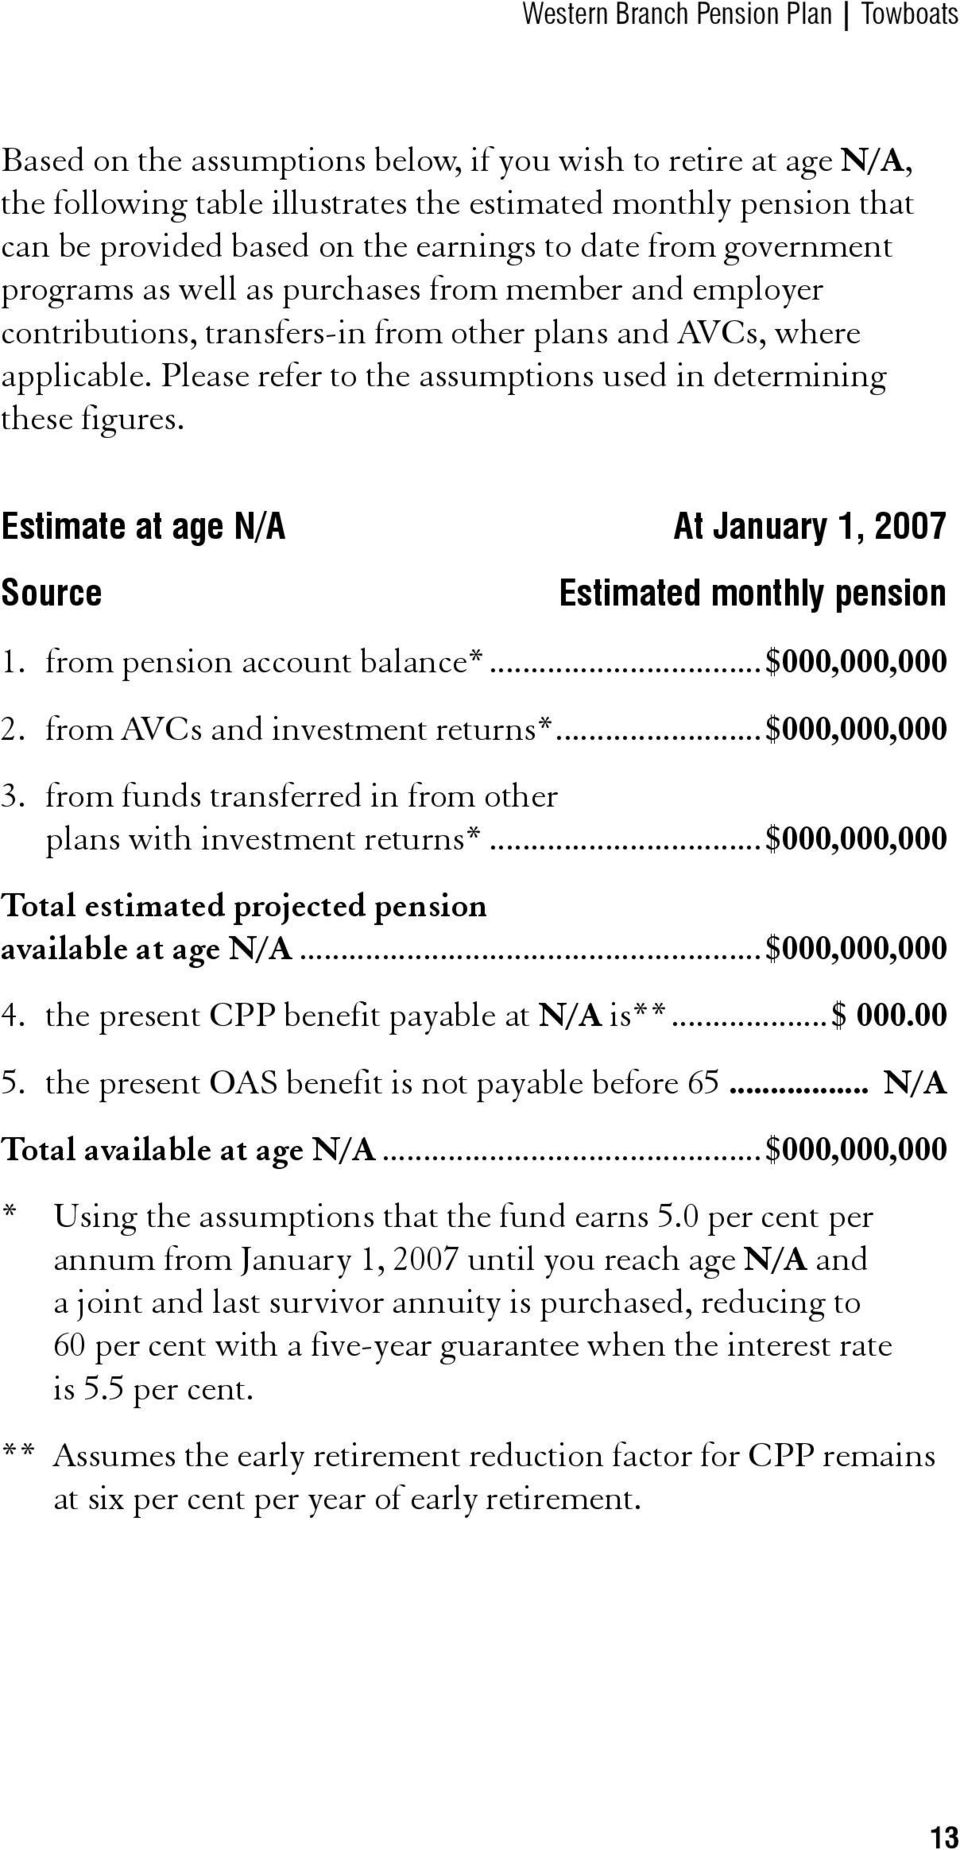 Please refer to the assumptions used in determining these figures. Estimate at age N/A At January 1, 2007 Source Estimated monthly pension 1. from pension account balance*...$000,000,000 2.